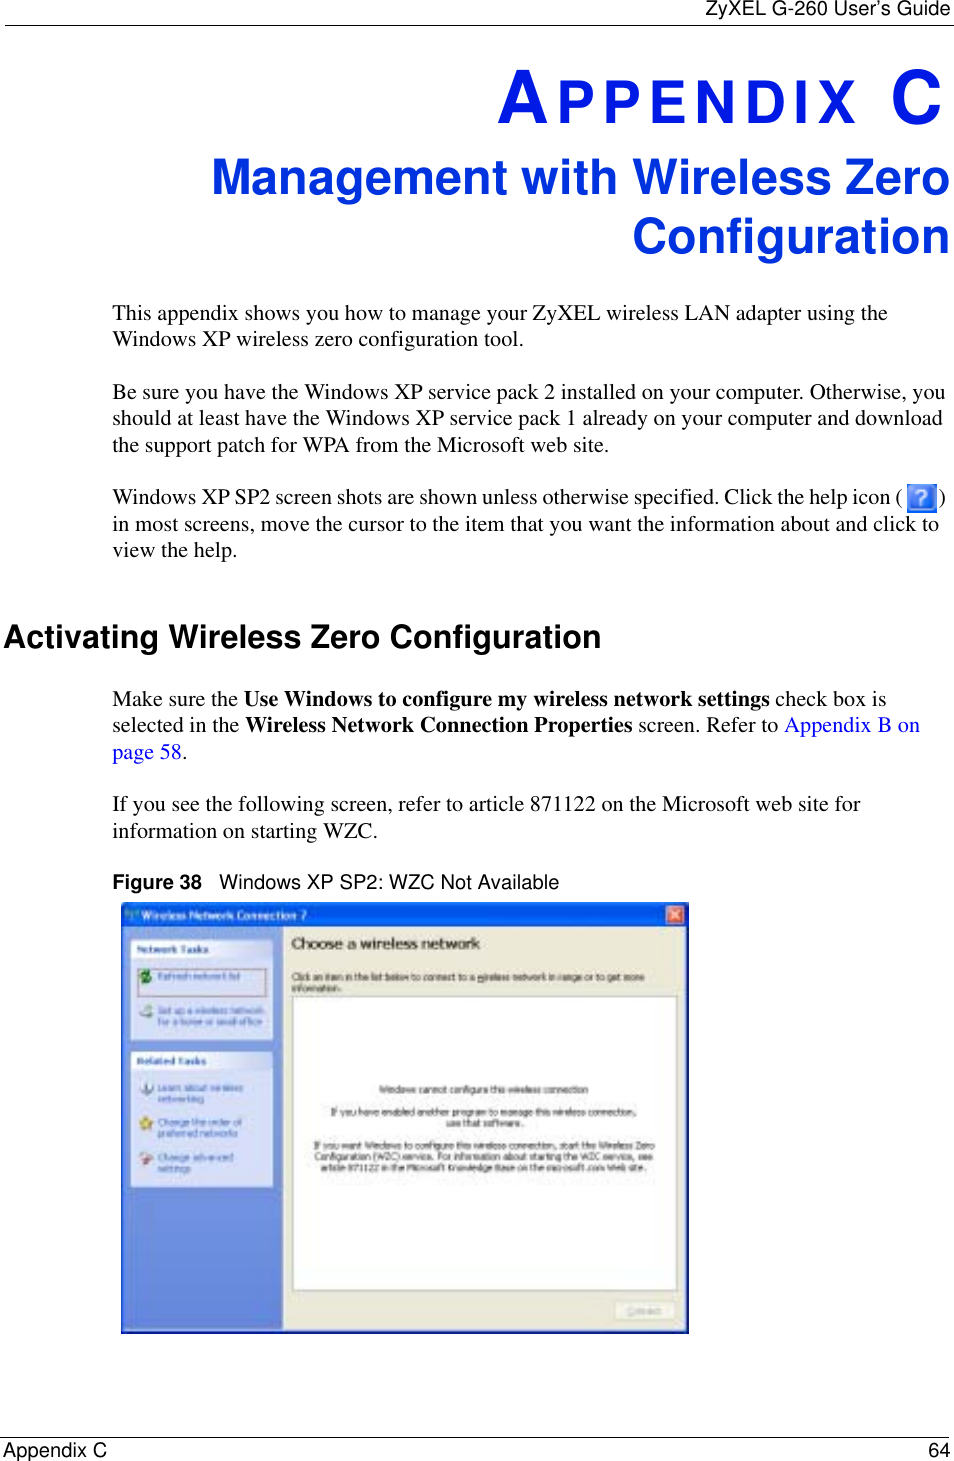 ZyXEL G-260 User’s GuideAppendix C 64APPENDIX CManagement with Wireless ZeroConfigurationThis appendix shows you how to manage your ZyXEL wireless LAN adapter using the Windows XP wireless zero configuration tool.Be sure you have the Windows XP service pack 2 installed on your computer. Otherwise, you should at least have the Windows XP service pack 1 already on your computer and download the support patch for WPA from the Microsoft web site.Windows XP SP2 screen shots are shown unless otherwise specified. Click the help icon ( ) in most screens, move the cursor to the item that you want the information about and click to view the help.Activating Wireless Zero ConfigurationMake sure the Use Windows to configure my wireless network settings check box is selected in the Wireless Network Connection Properties screen. Refer to Appendix B on page 58.If you see the following screen, refer to article 871122 on the Microsoft web site for information on starting WZC.Figure 38   Windows XP SP2: WZC Not Available